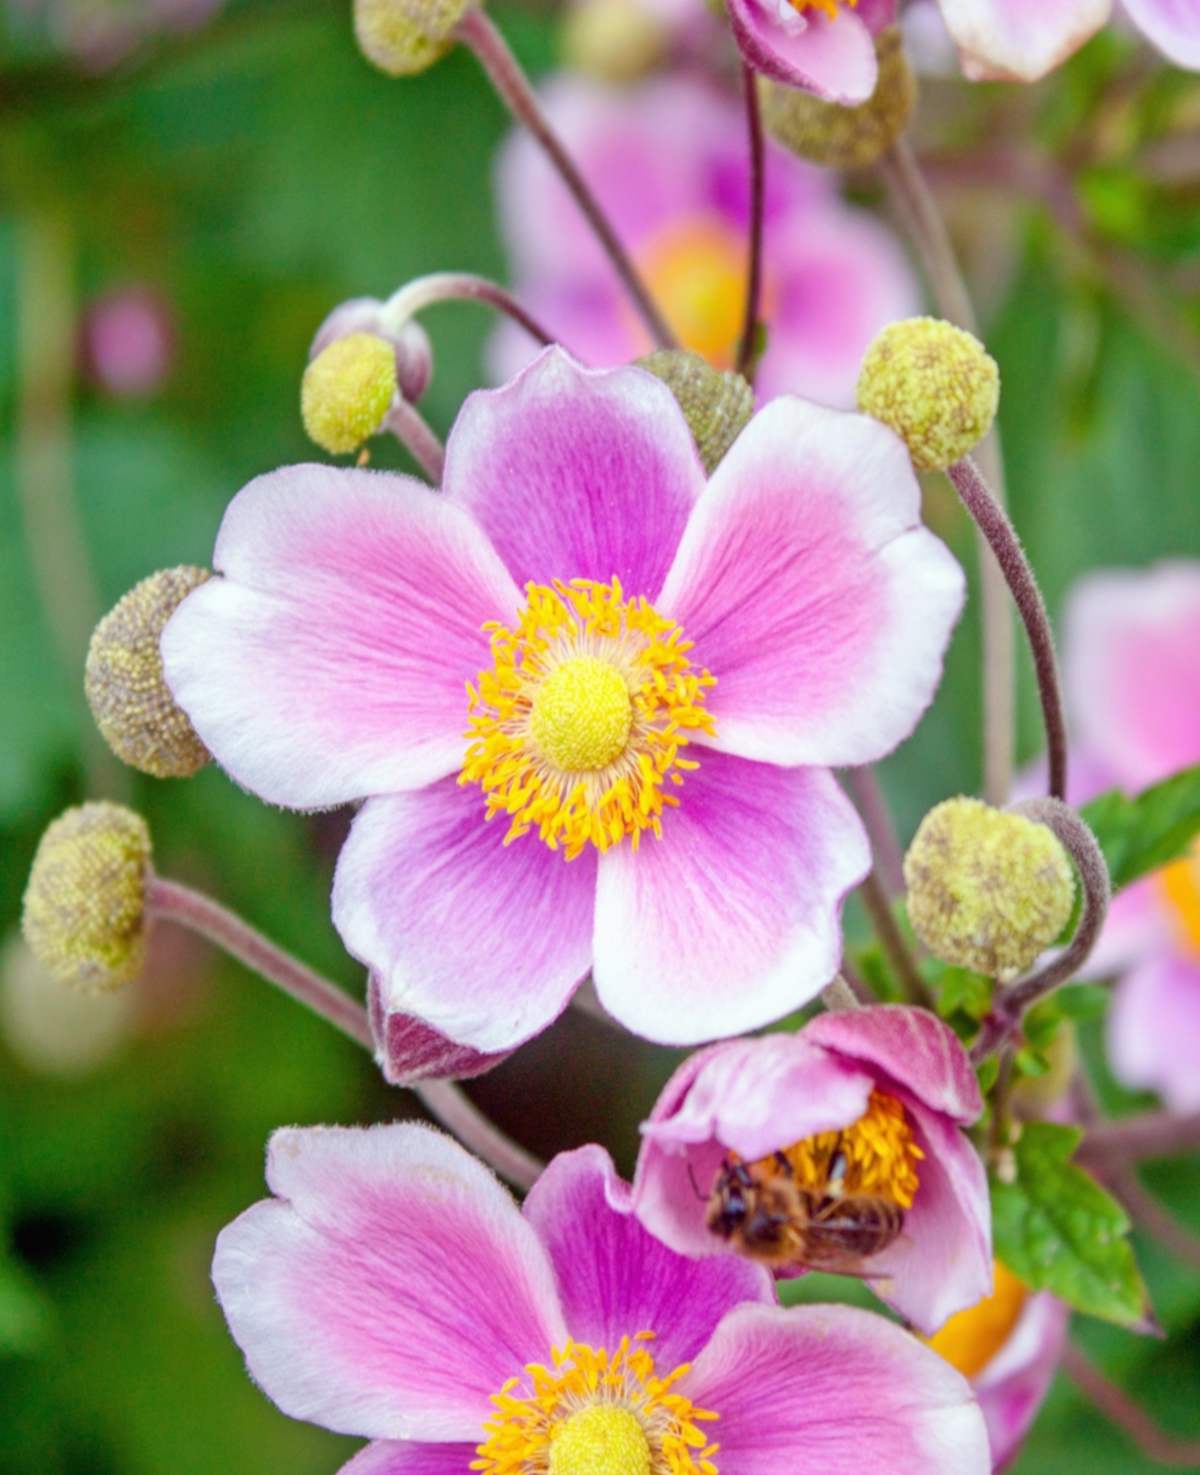 Pink japanese anemones with white fringes